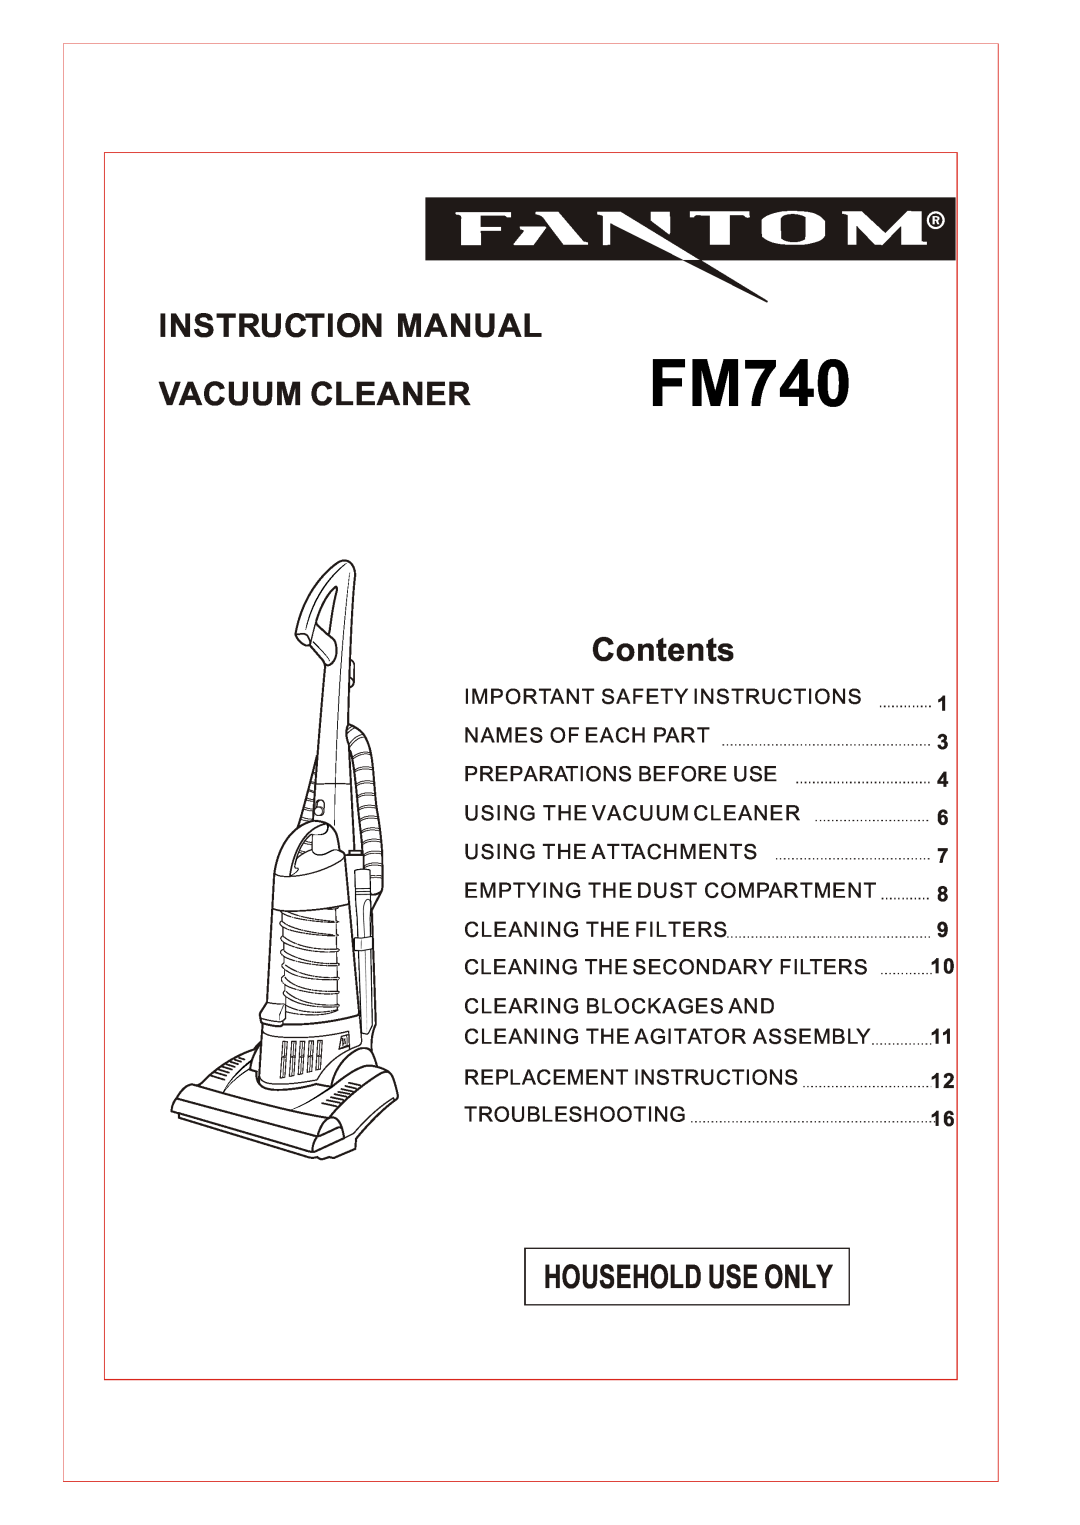 Fantom Vacuum FM740 instruction manual Vacuum Cleaner, Contents, Household Use Only 